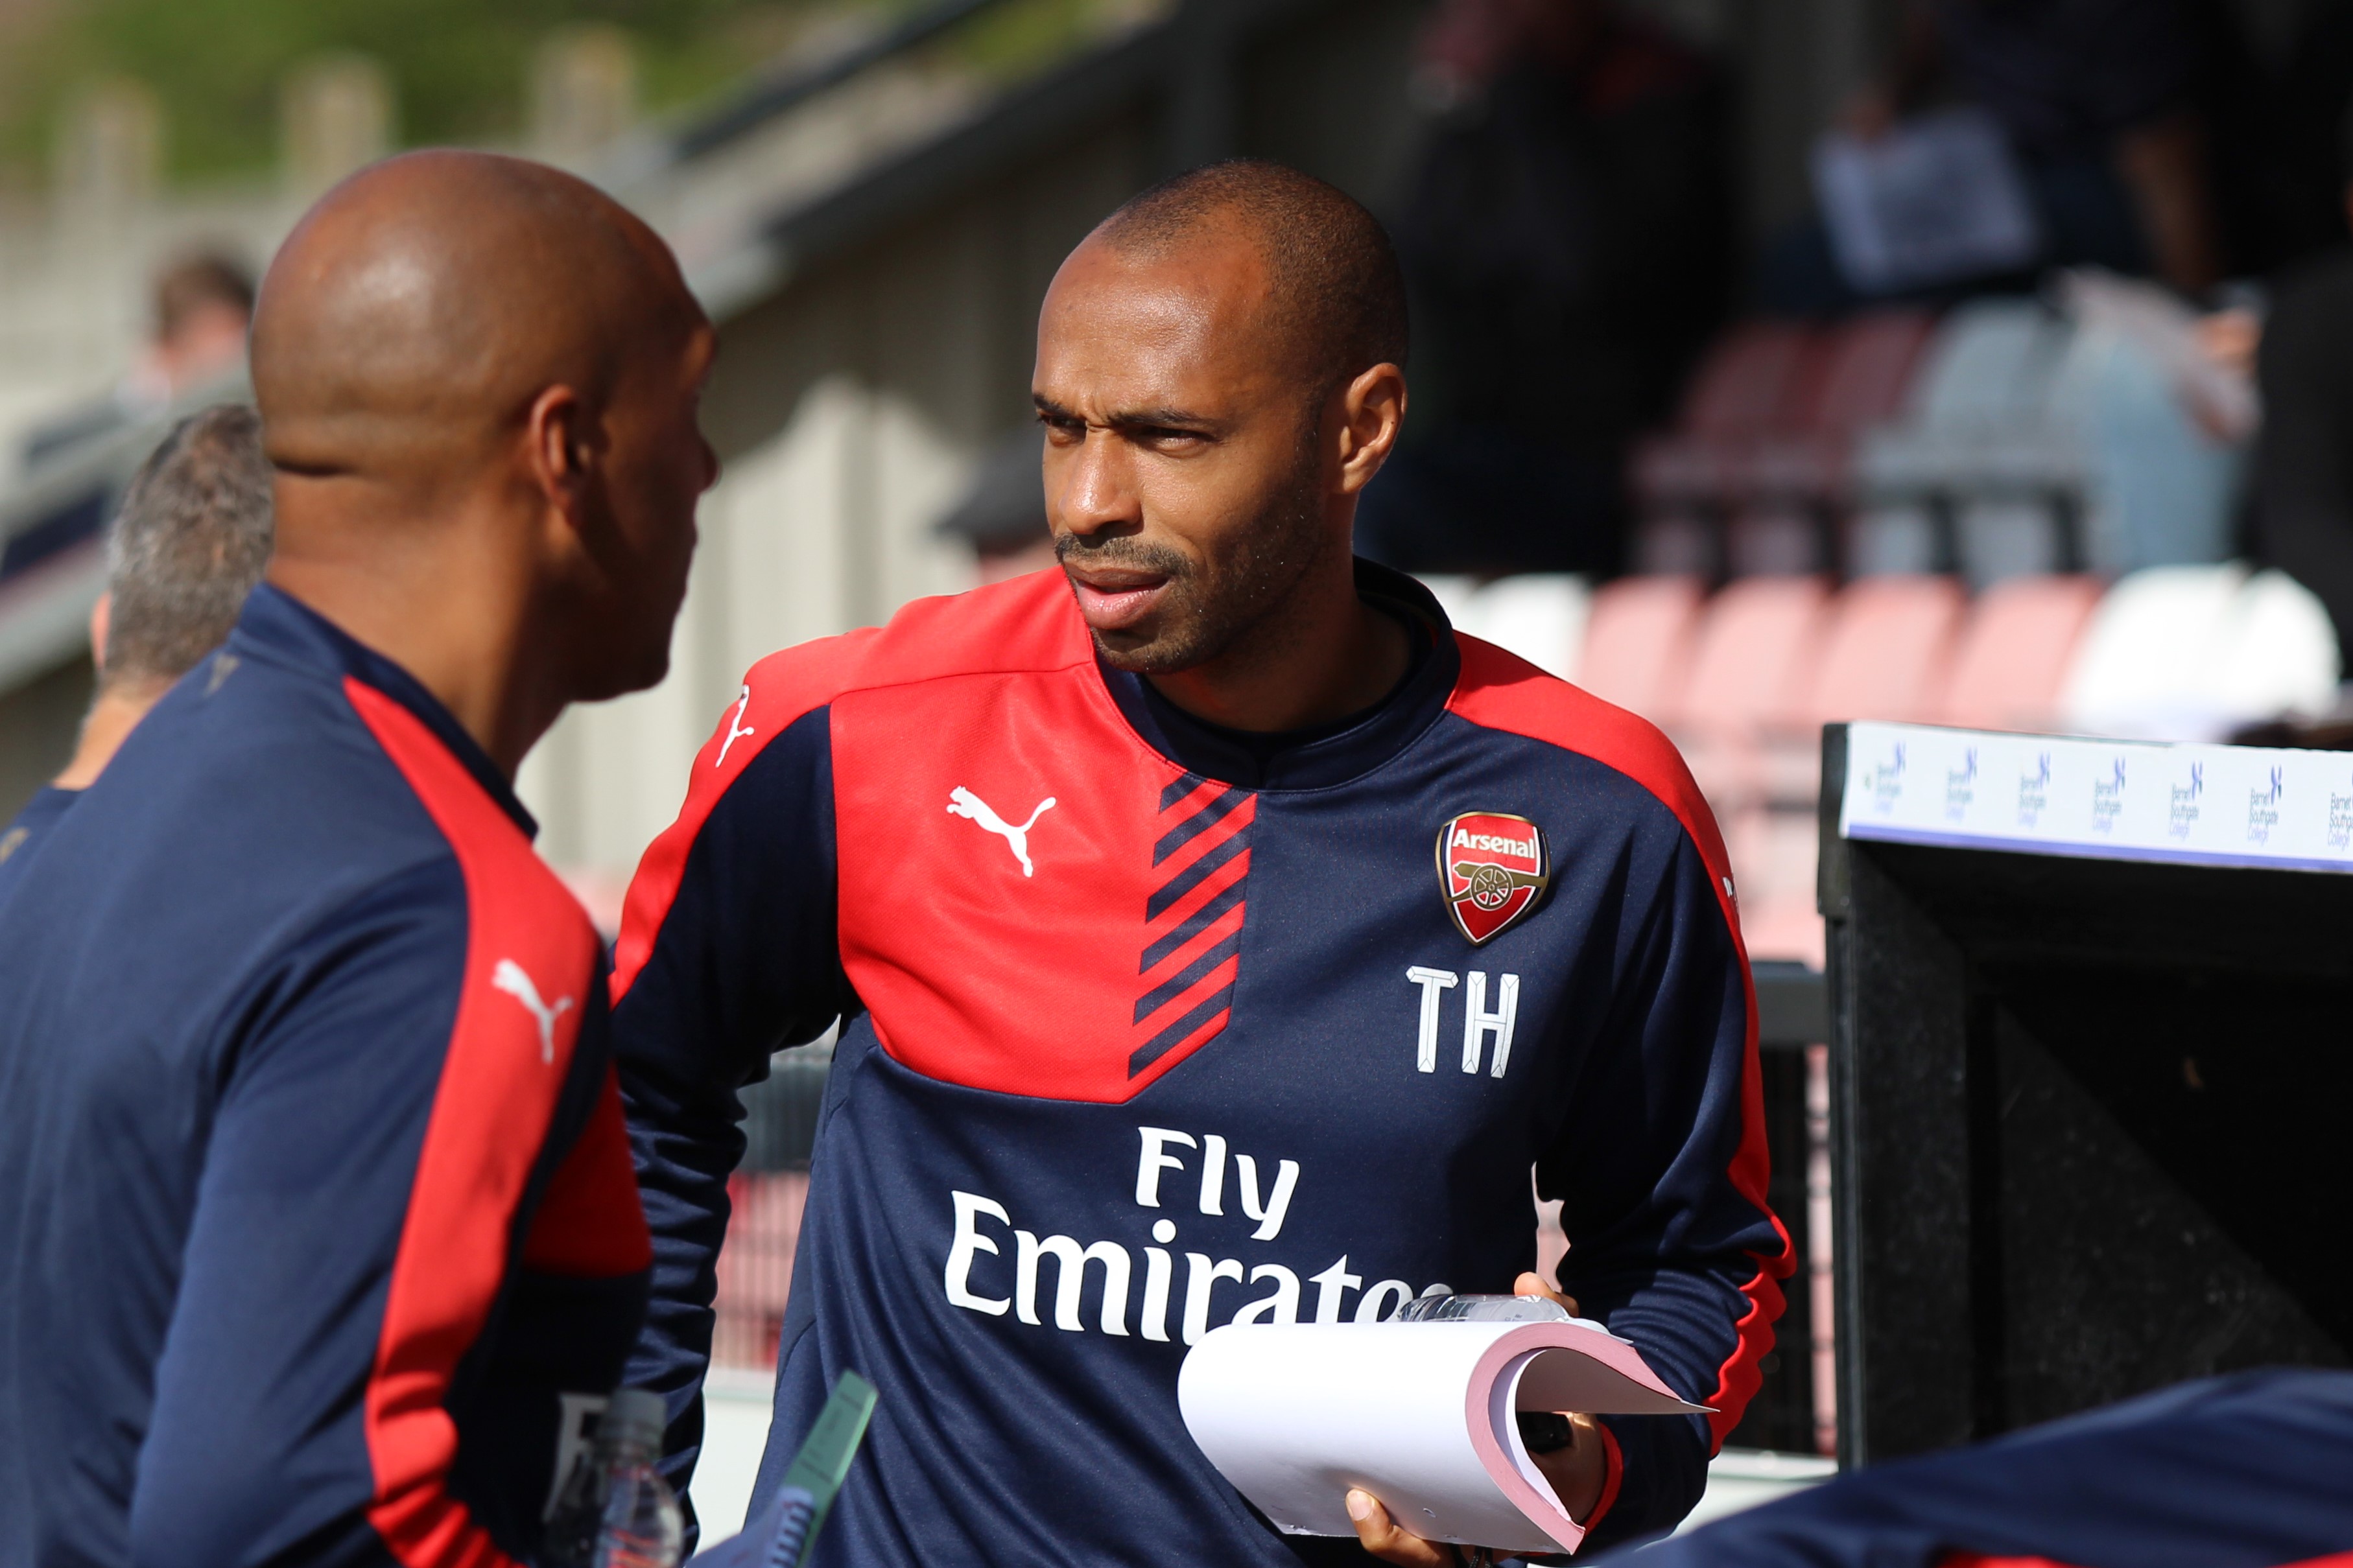 Thierry Henry - Wikipedia